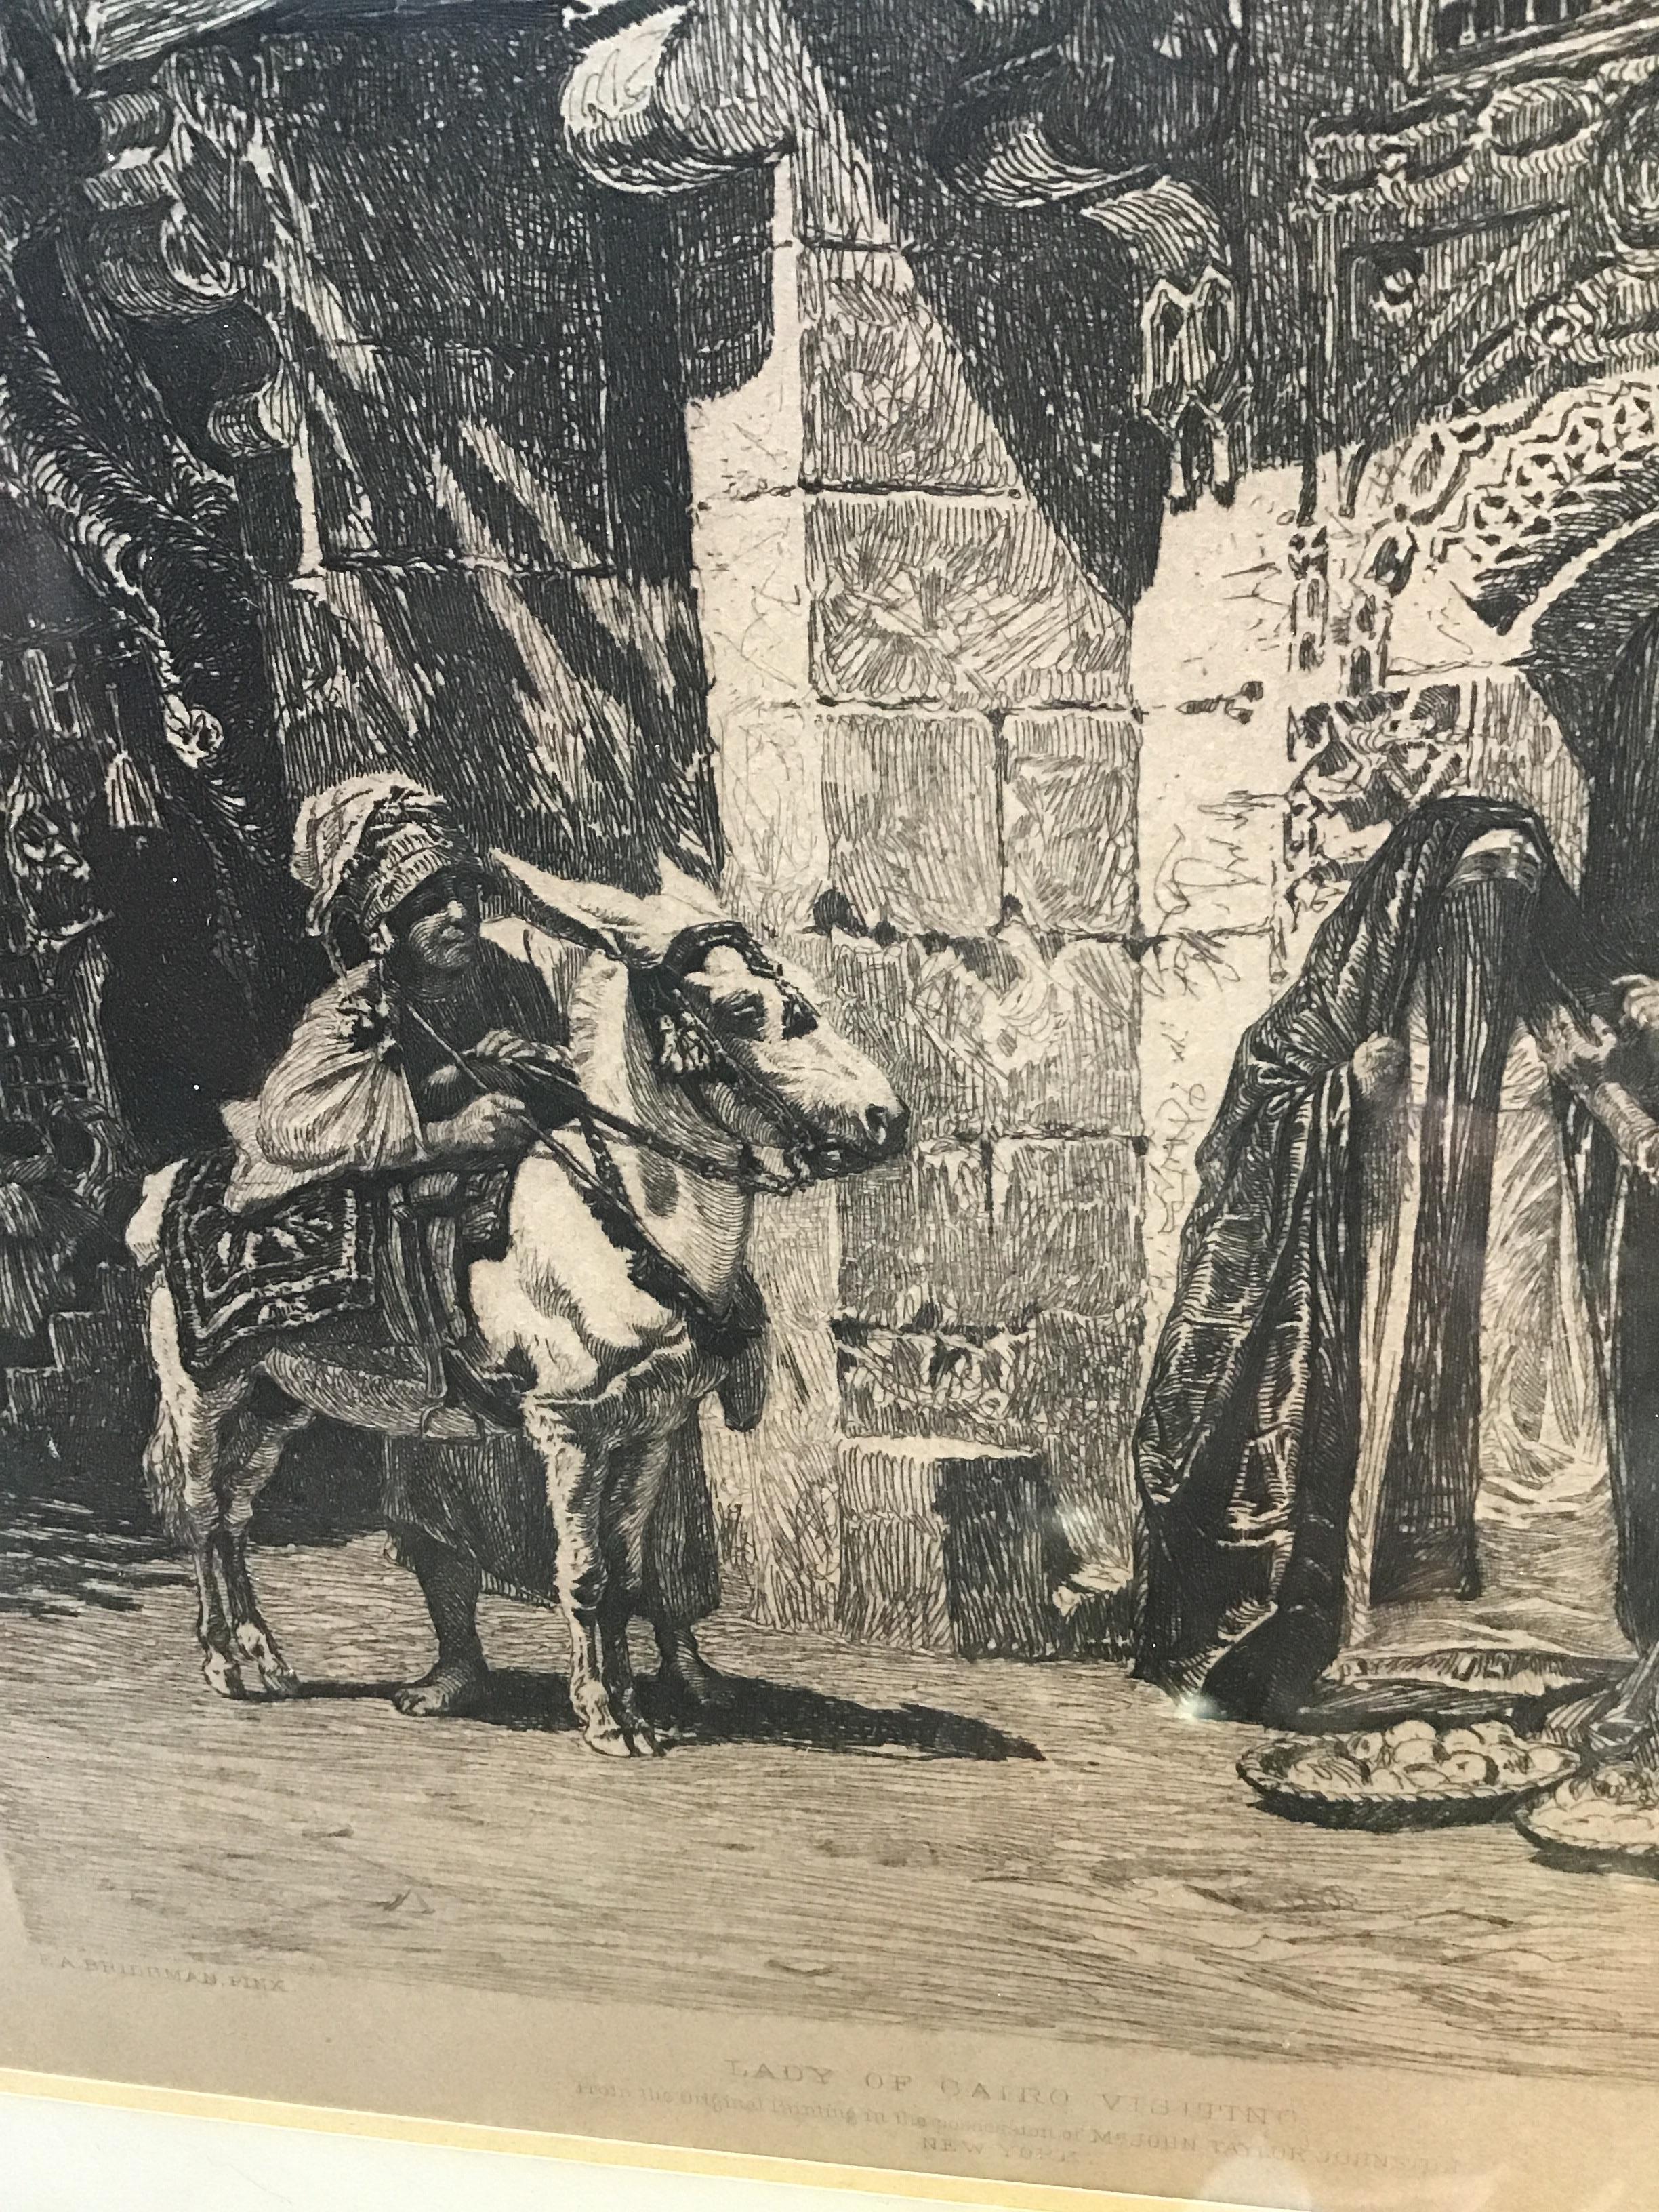 1880s F. A. Bridgman Etching Entitled Lady of Cairo Visiting 2